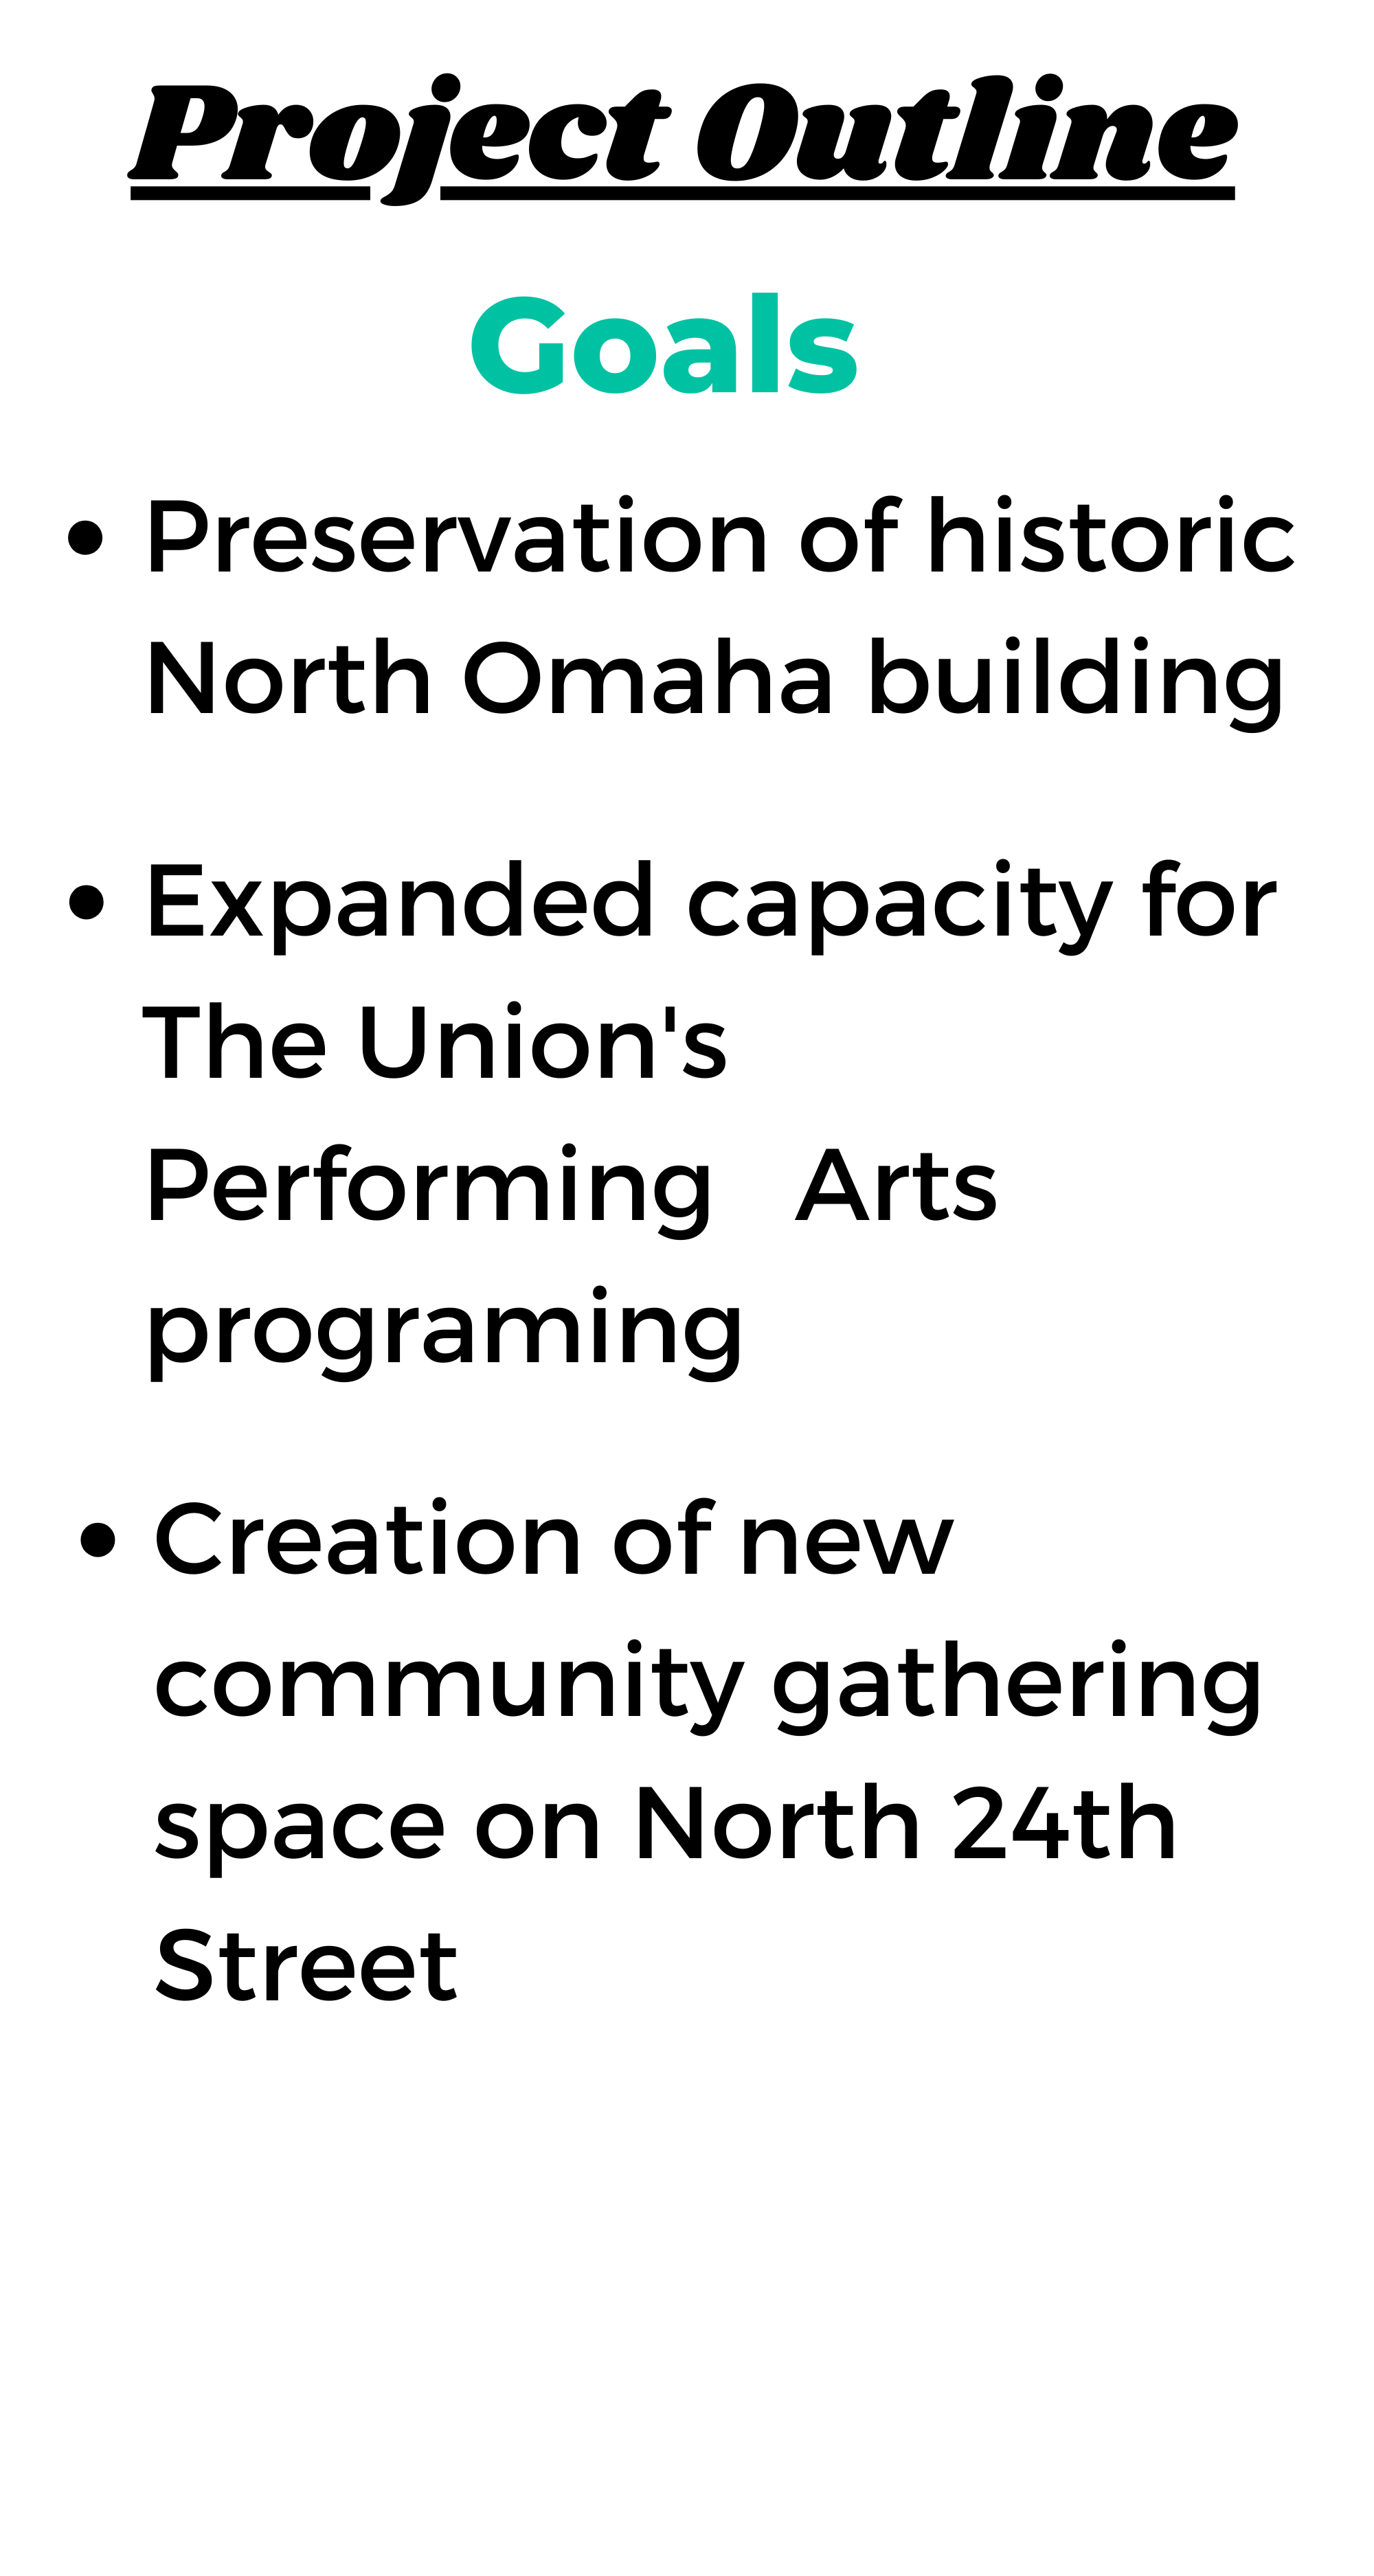 Project Outline Preservation of historic North Omaha building Expanded capacity for The Unions Performing Arts programing Creation of new community gathering space on North 24th Street